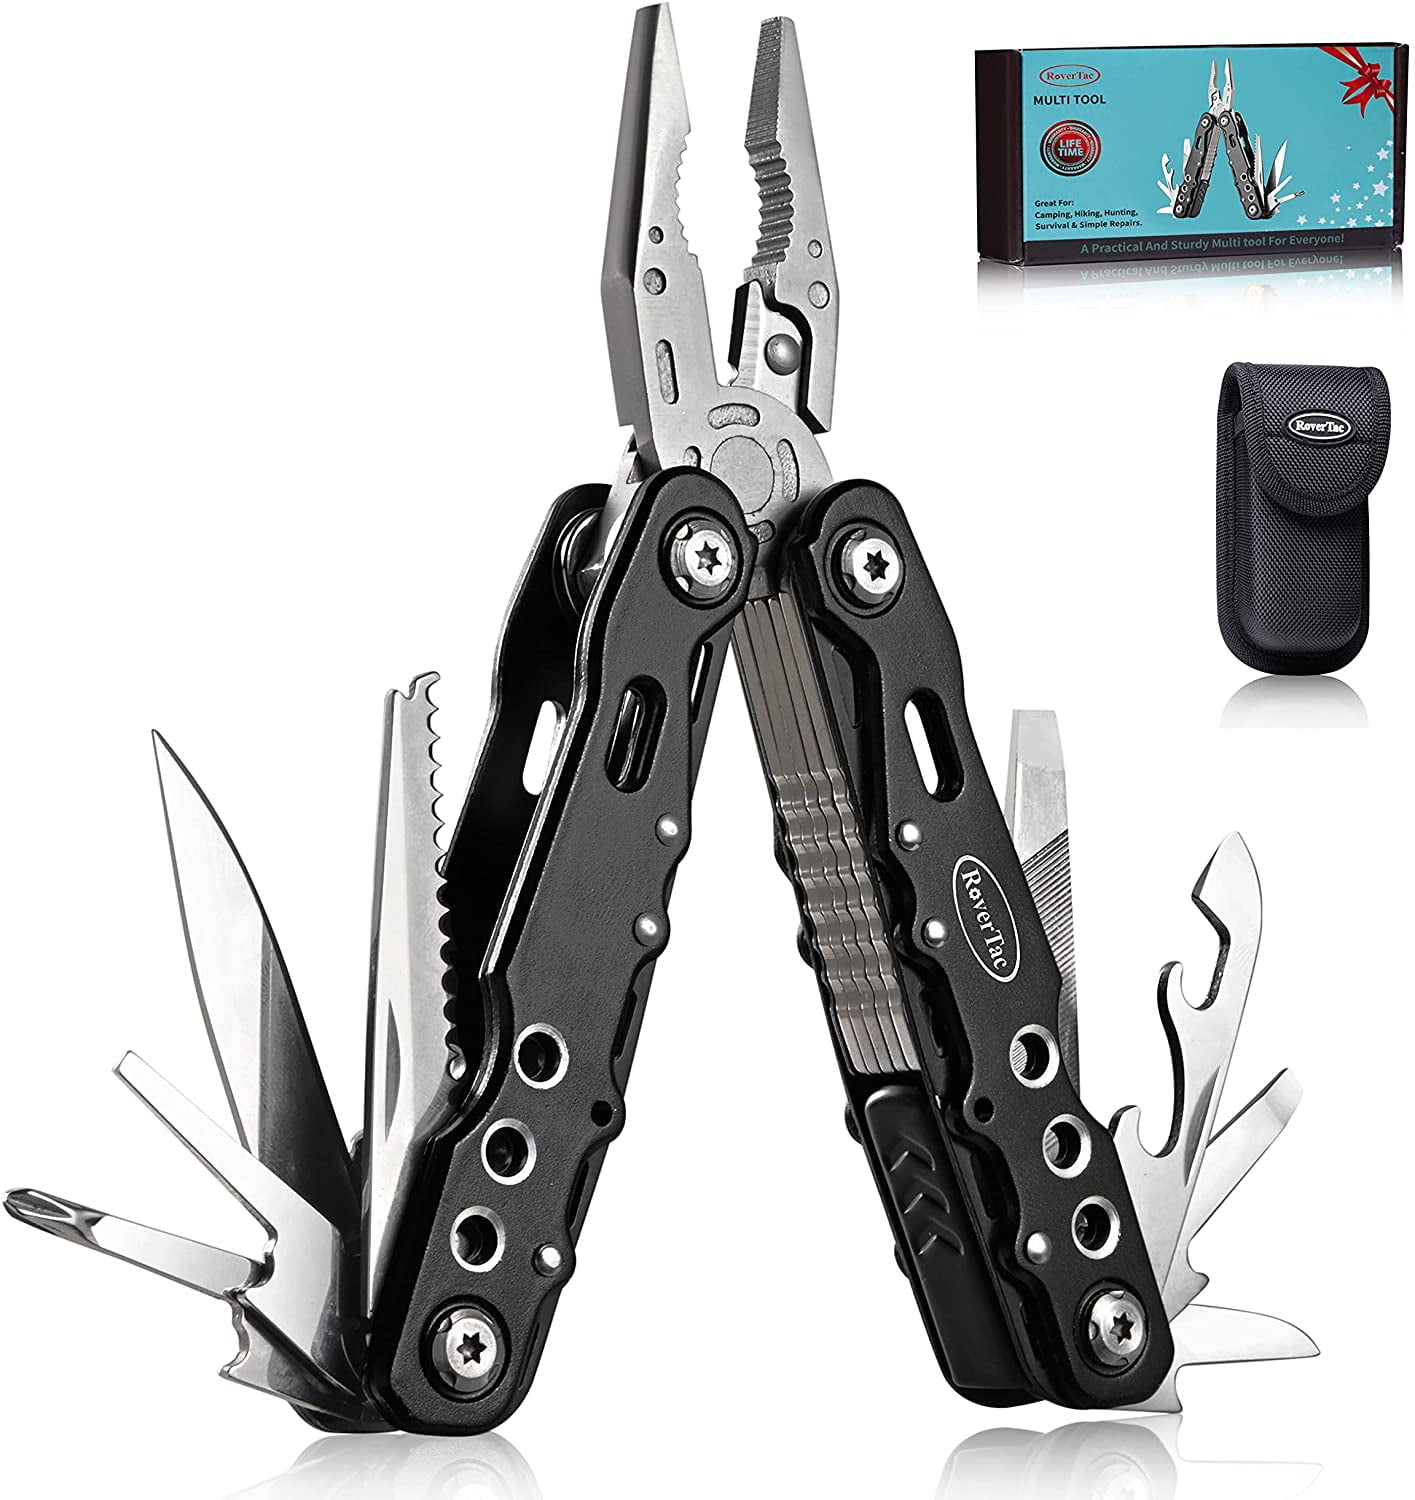 RoverTac Multitool Knife Pliers Chirstmas Gifts Husband 12 in 1 Multi Tool  with Safety Lock Screwdrivers Bottle Opener Durable Sheath Perfect Camping  Hiking Simple Repairs 